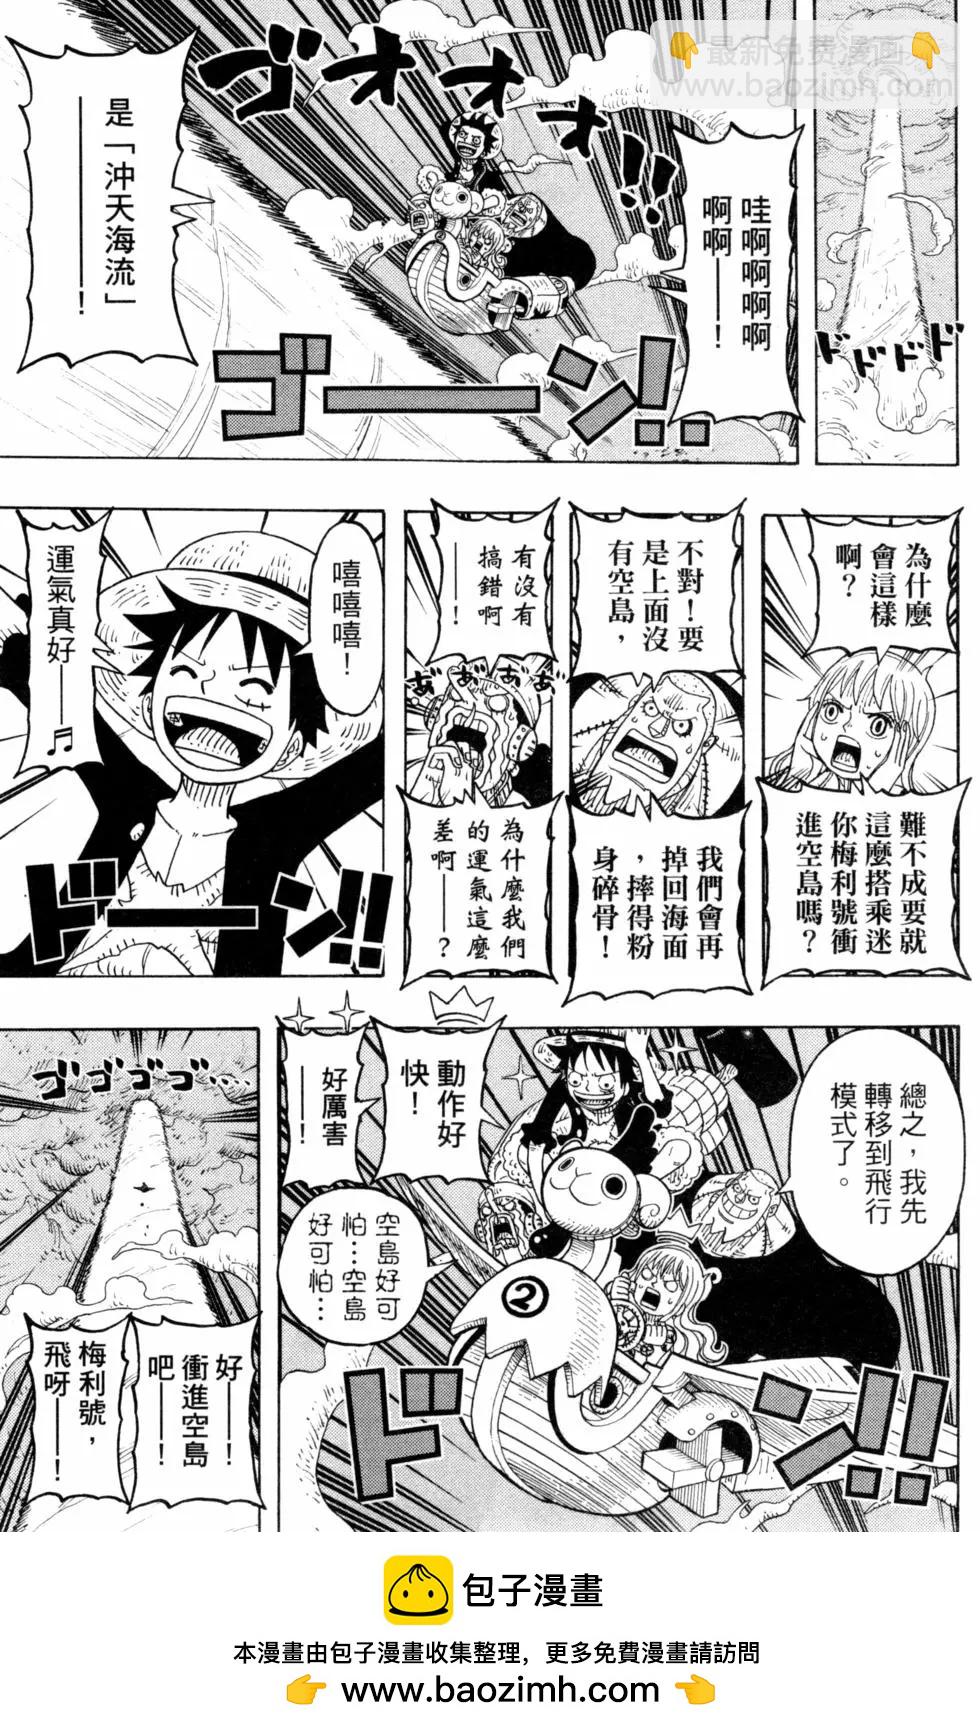 One piece party - 第06卷(1/4) - 2